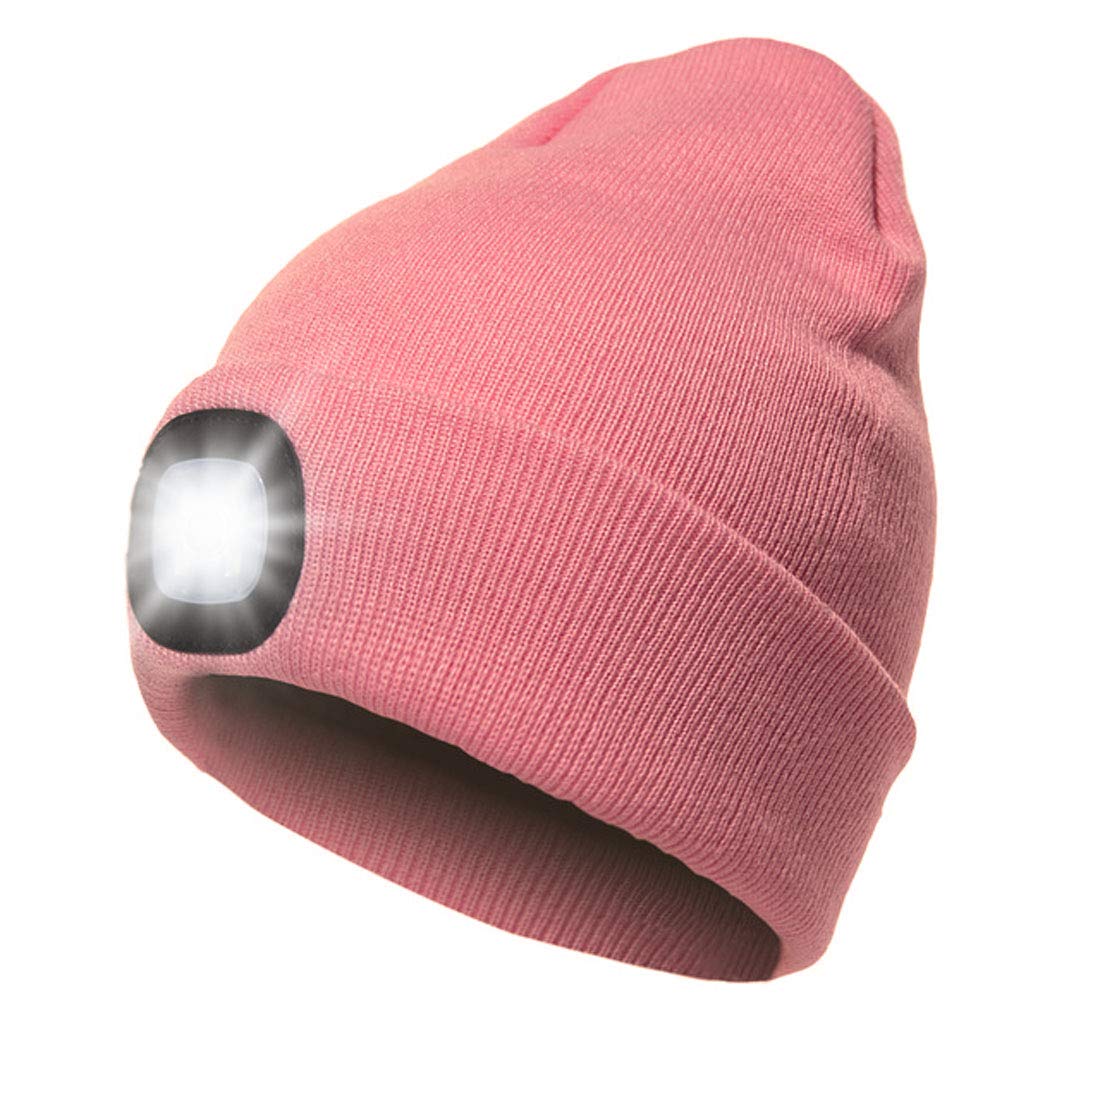 CENSGO Beanie with Light, USB Rechargeable Knitted Lighted Hat, Easter Gifts for Men Dad Him Women Her, Unisex Lighted Beanie for Walki